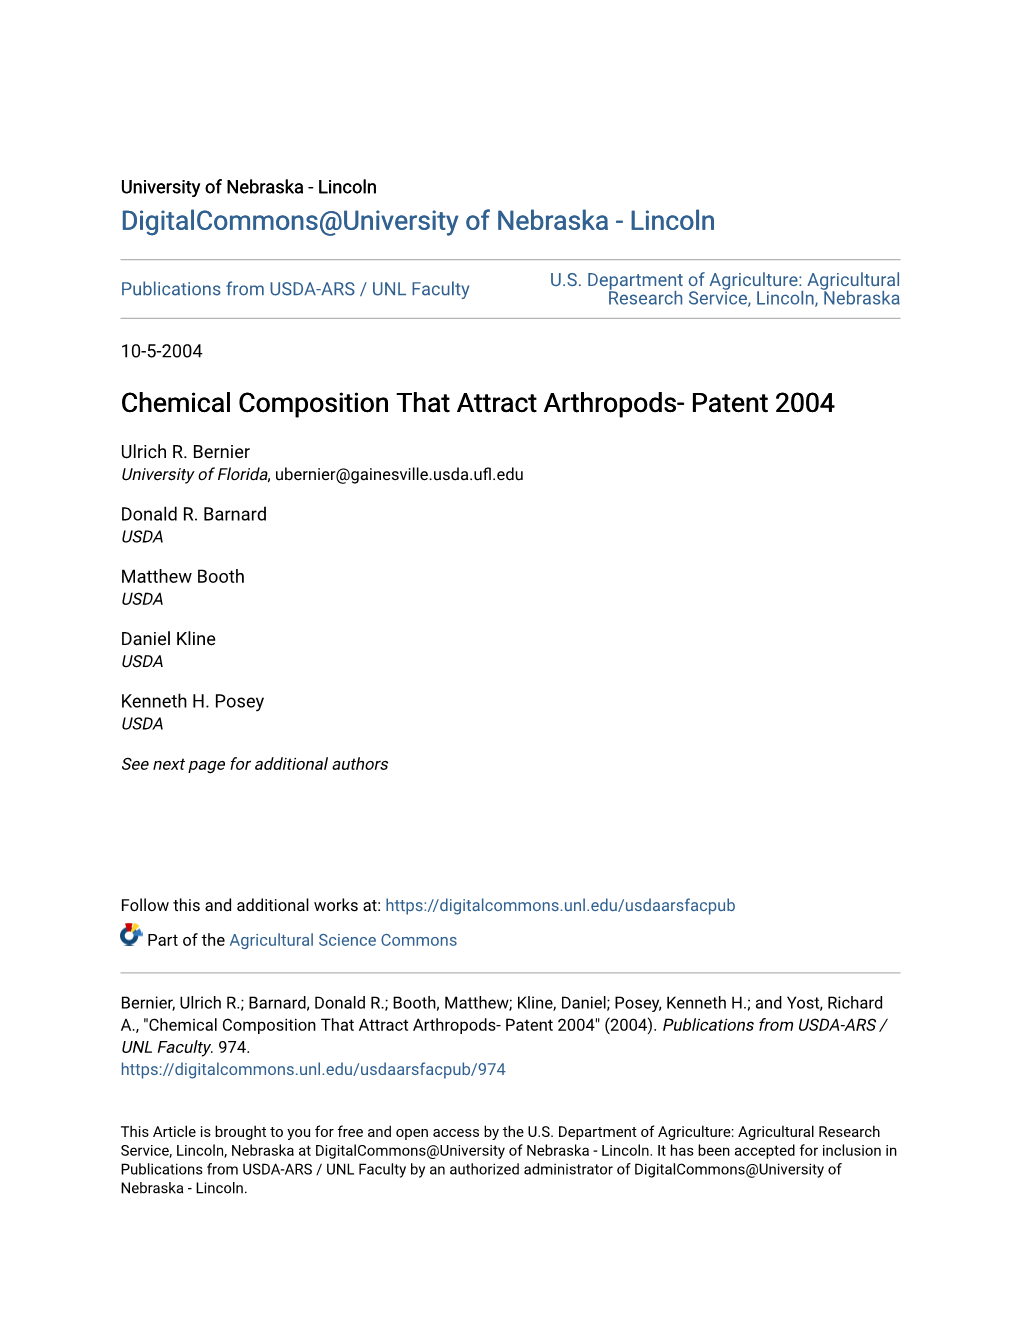 Chemical Composition That Attract Arthropods- Patent 2004